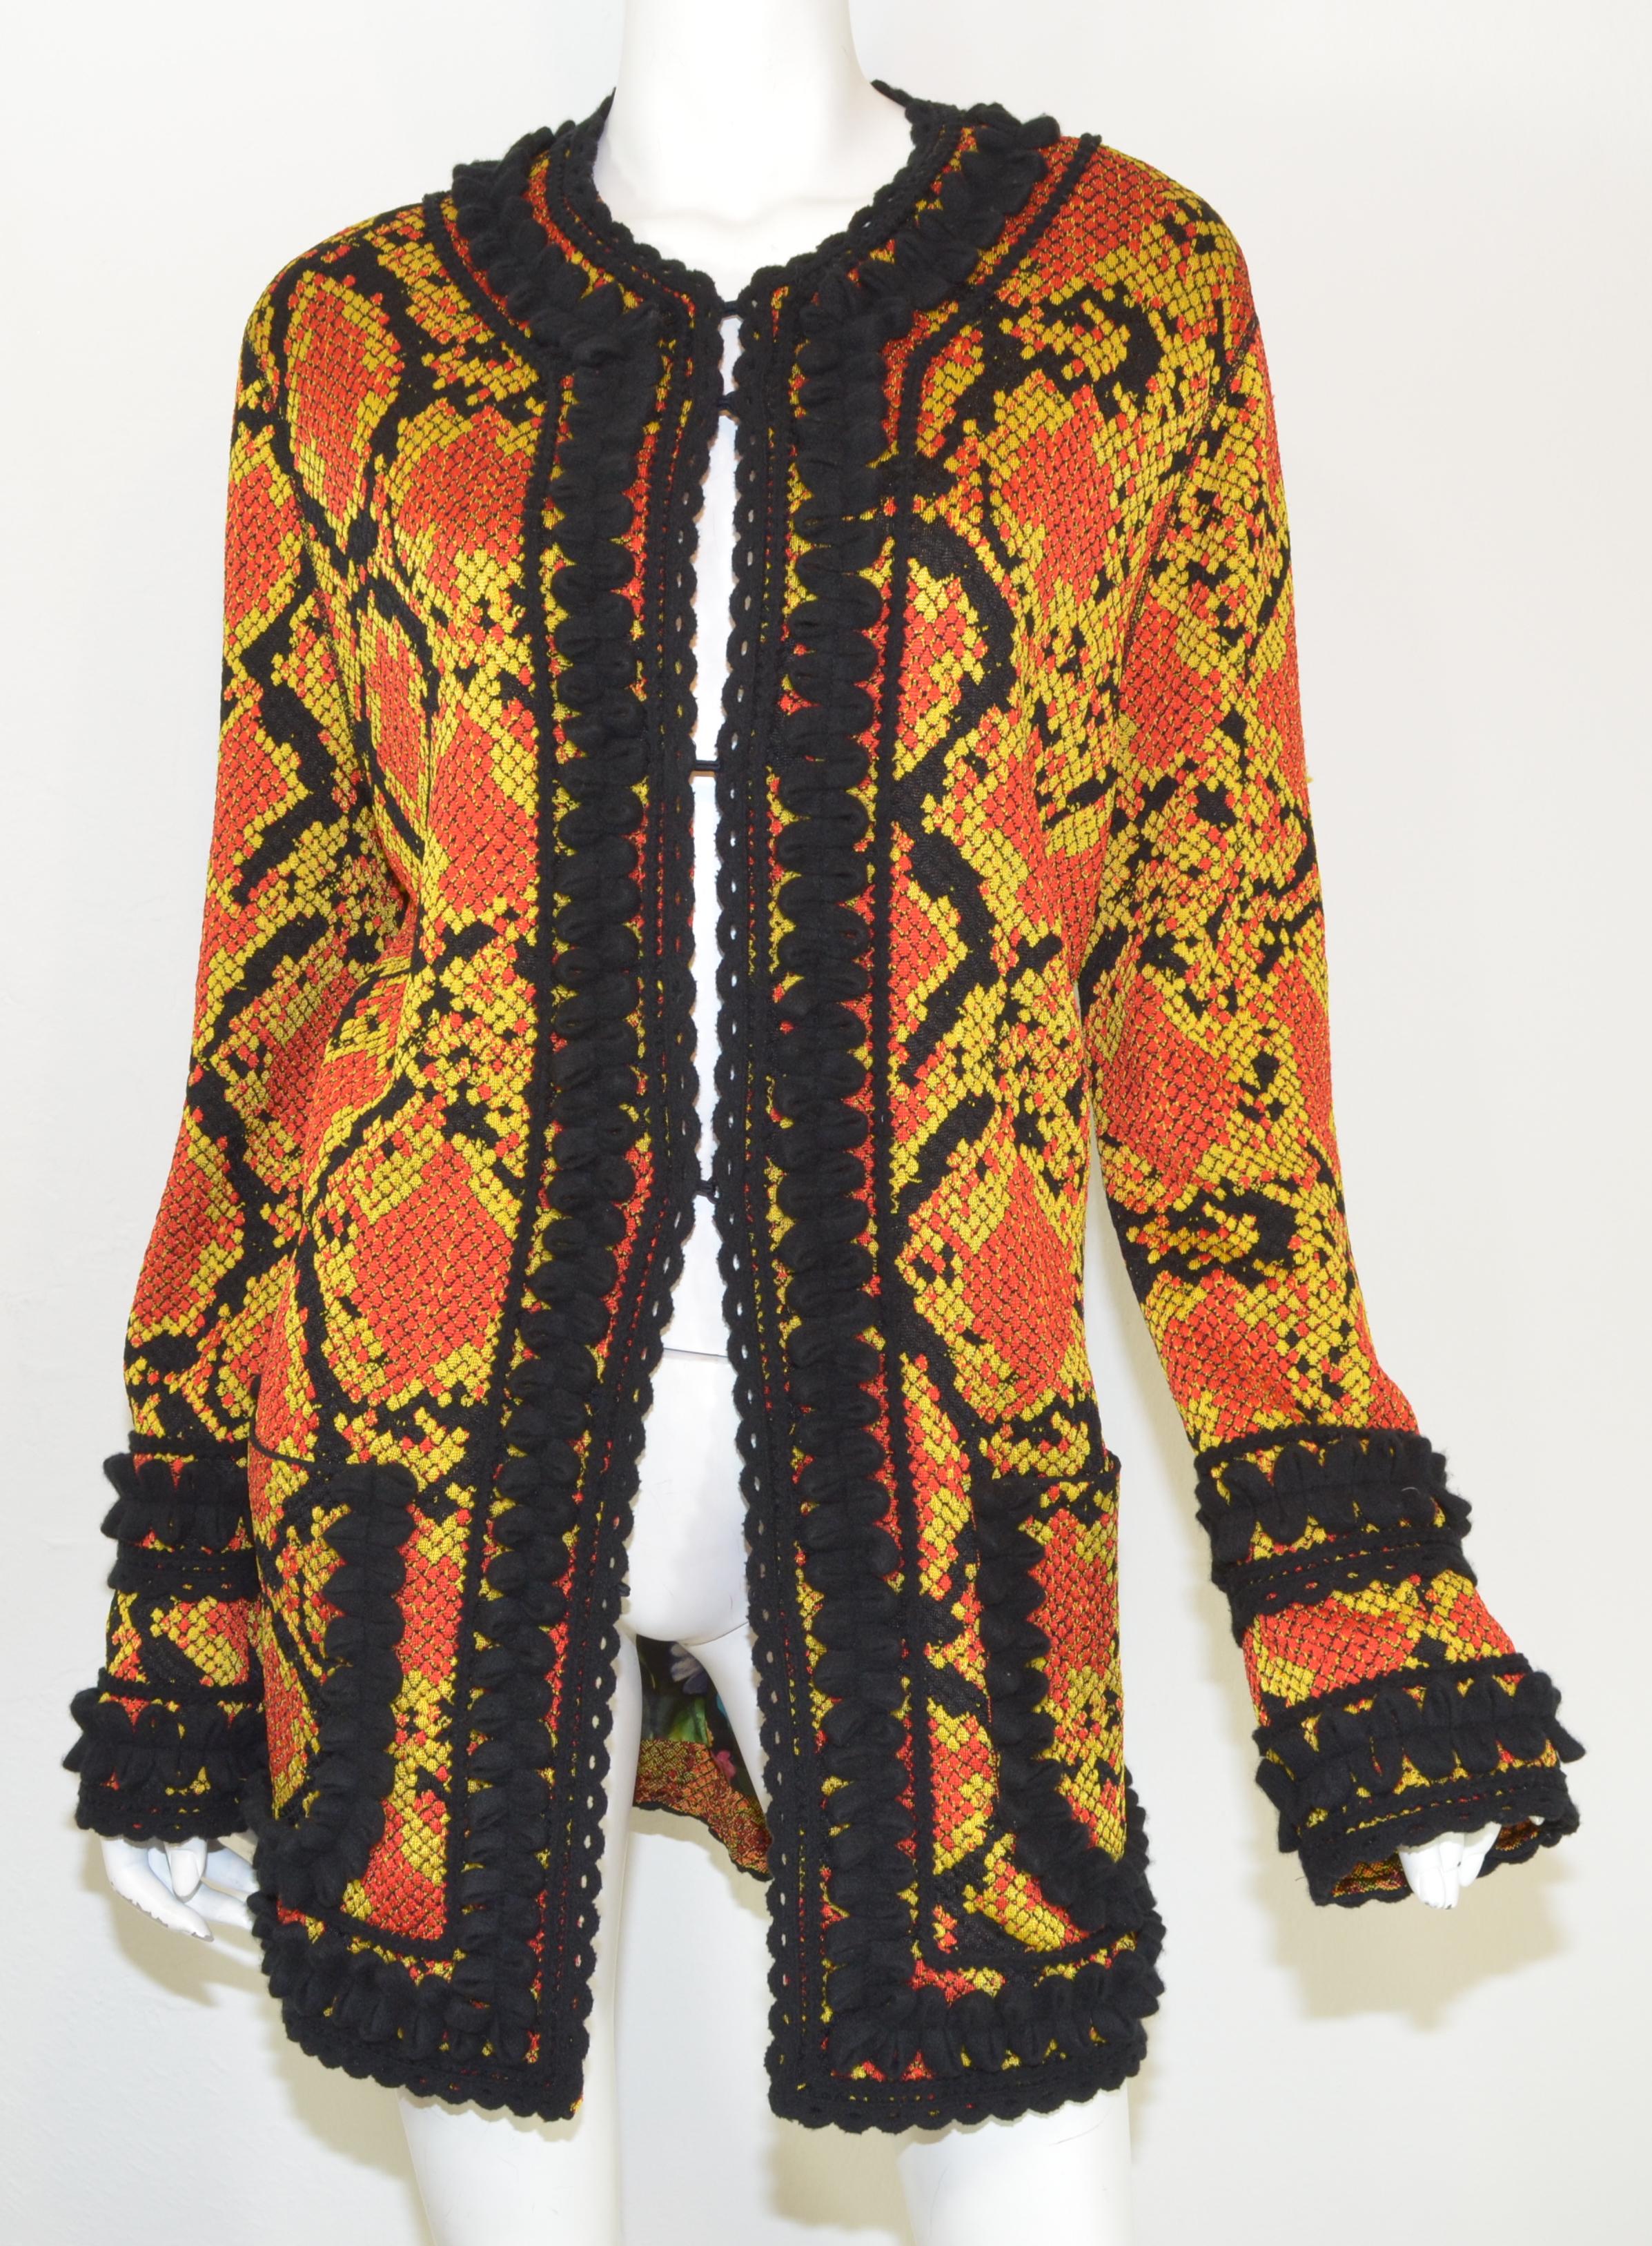 Gucci cardigan from their 2019 collection is featured in a red and yellow blend with a snakeskin design to the knitted fabric with hook-and-eye closures and a vibrant floral printed lining. Made in Italy. New with Tags with no flaws to